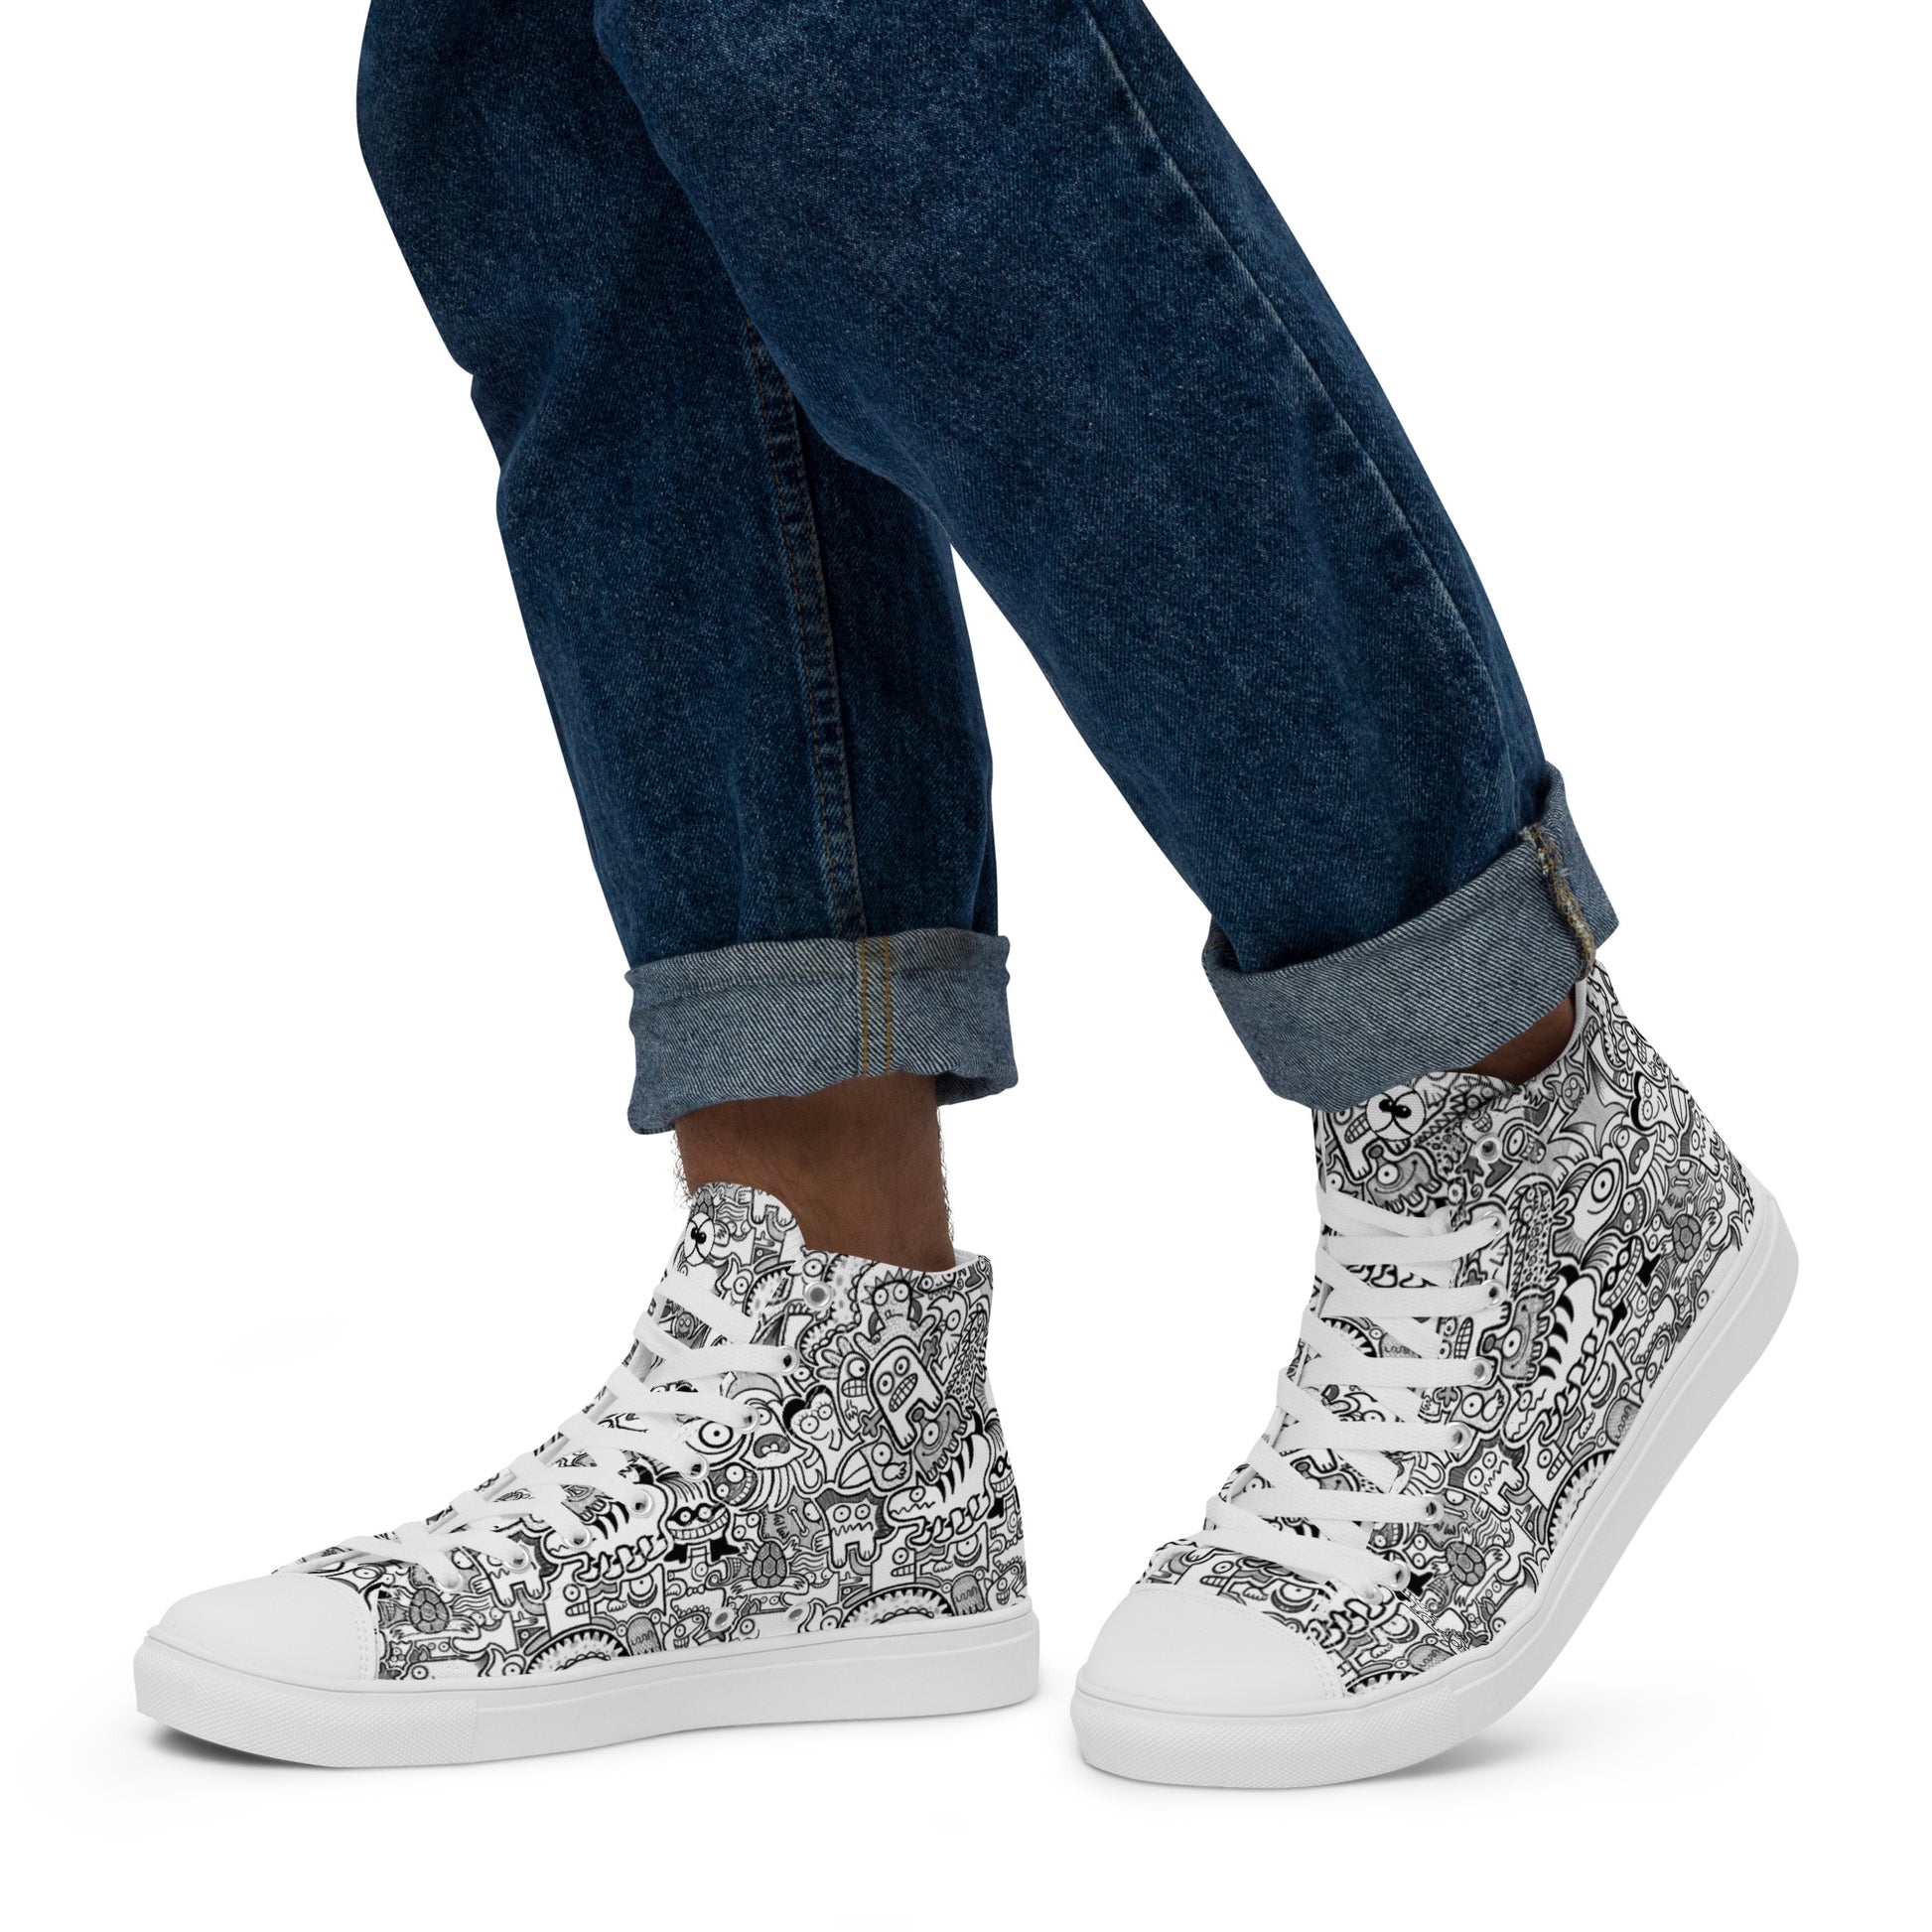 Fill your world with cool doodles Men’s high top canvas shoes. Lifestyle